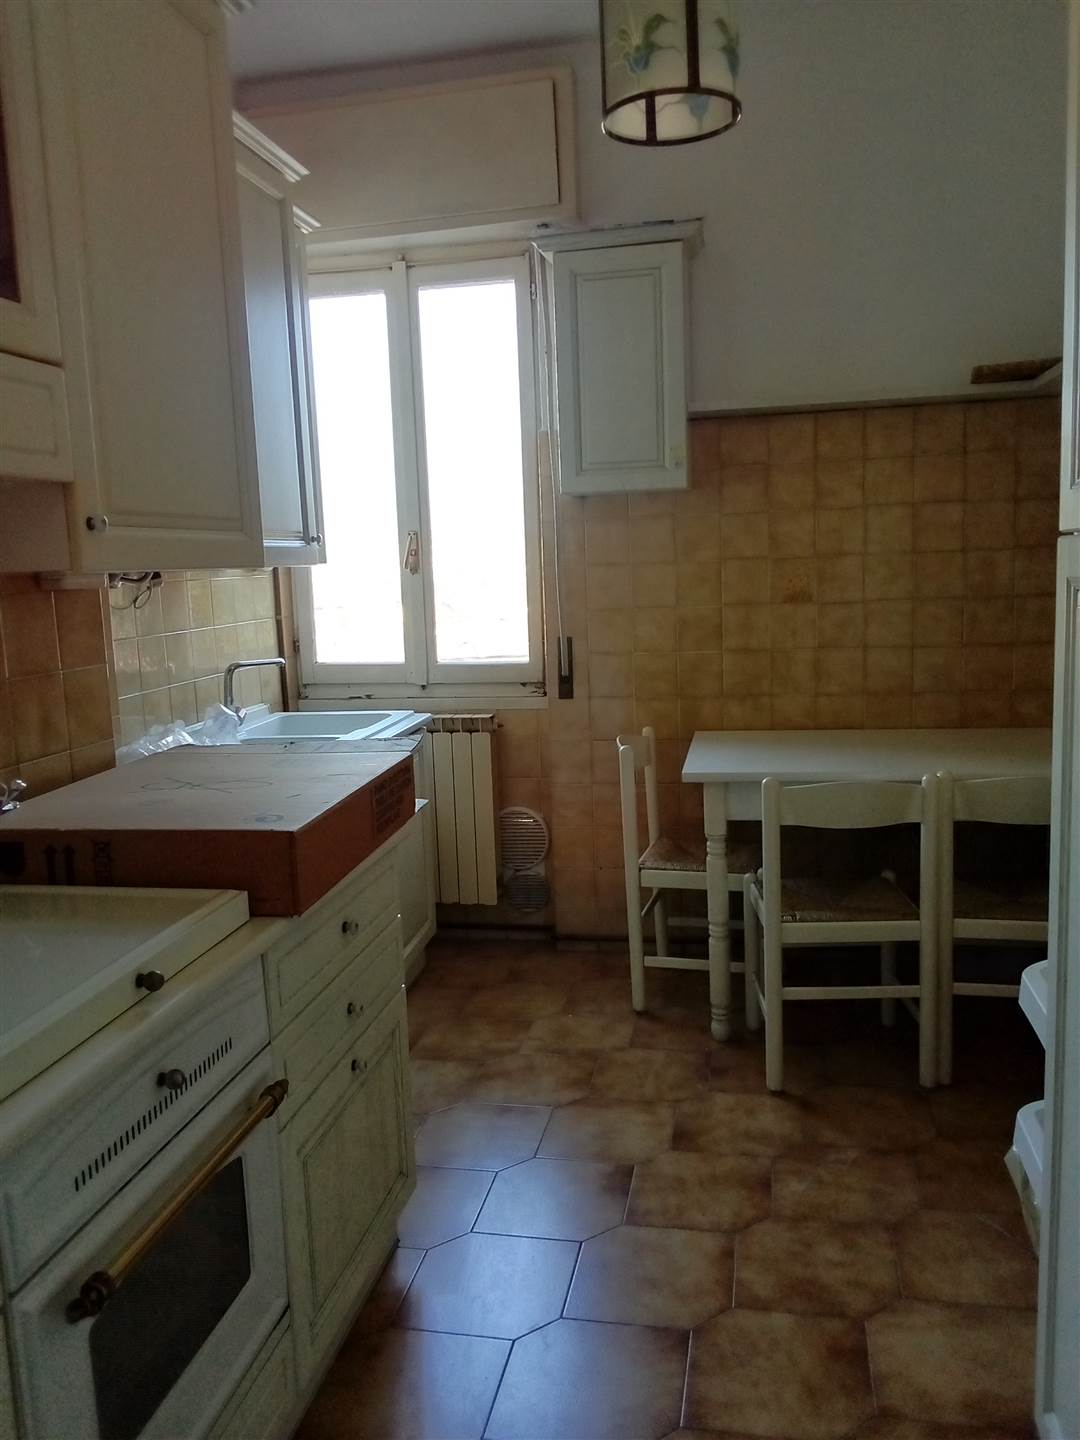 MELZO, Apartment for rent of 70 Sq. mt., placed at 4° on 4, composed by: 2 Rooms, 1 Bedroom, 1 Bathroom, Price: € 800